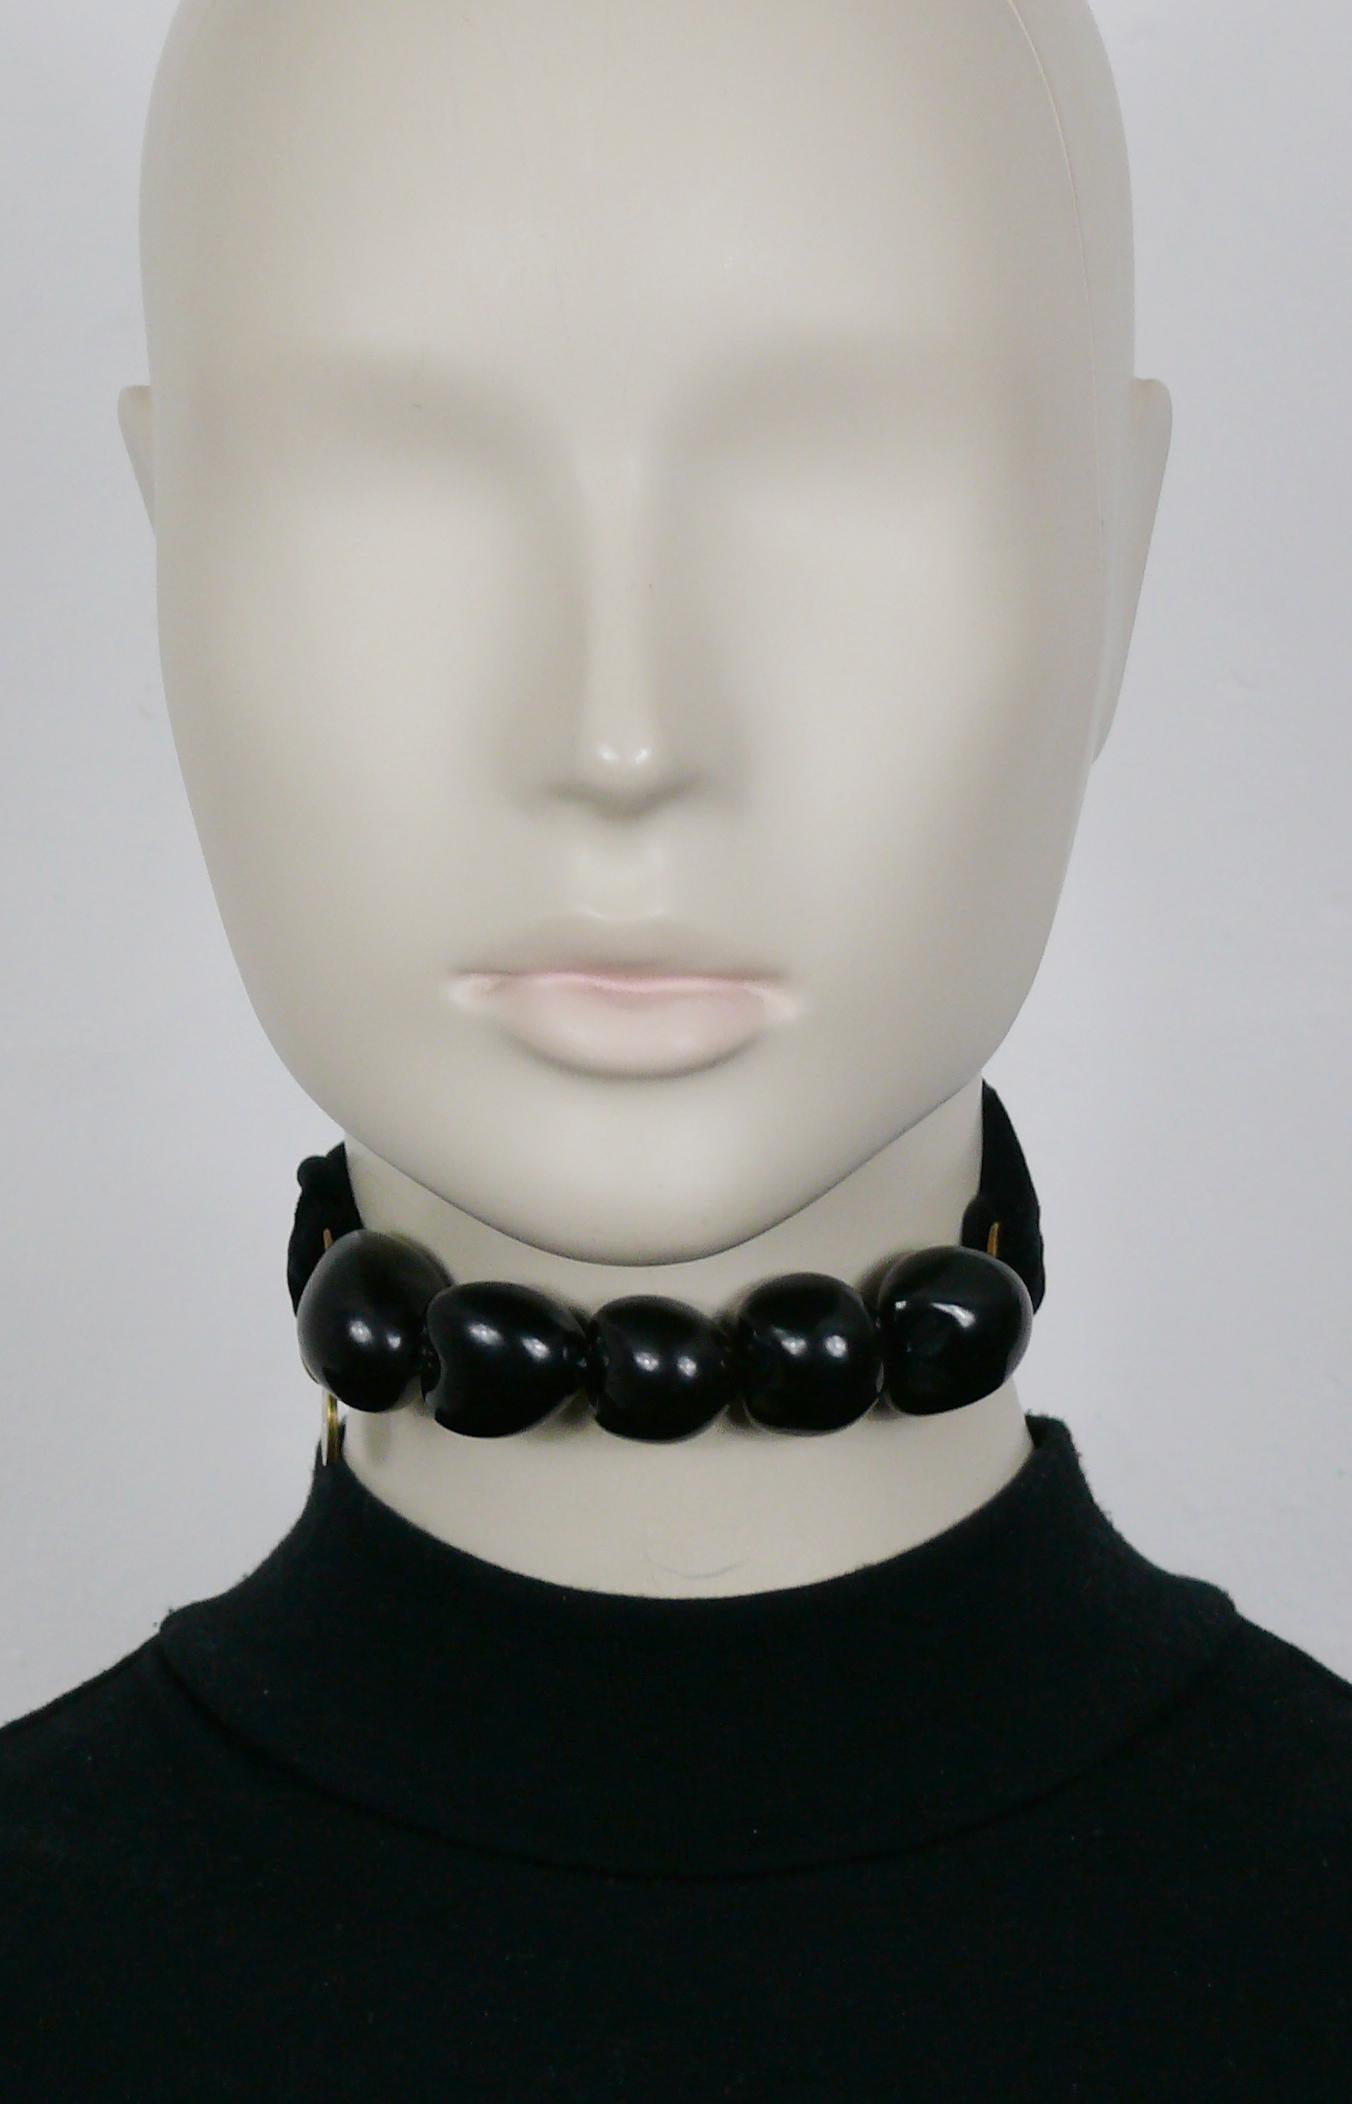 YVES SAINT LAURENT choker necklace/bracelet featuring five black resin beads and black velvet straps.

Ties at the back of neck.

Hanging coin embossed YSL.

Indicative measurements : total length approx. 76 cm (29.92 inches) / bead max. diameter